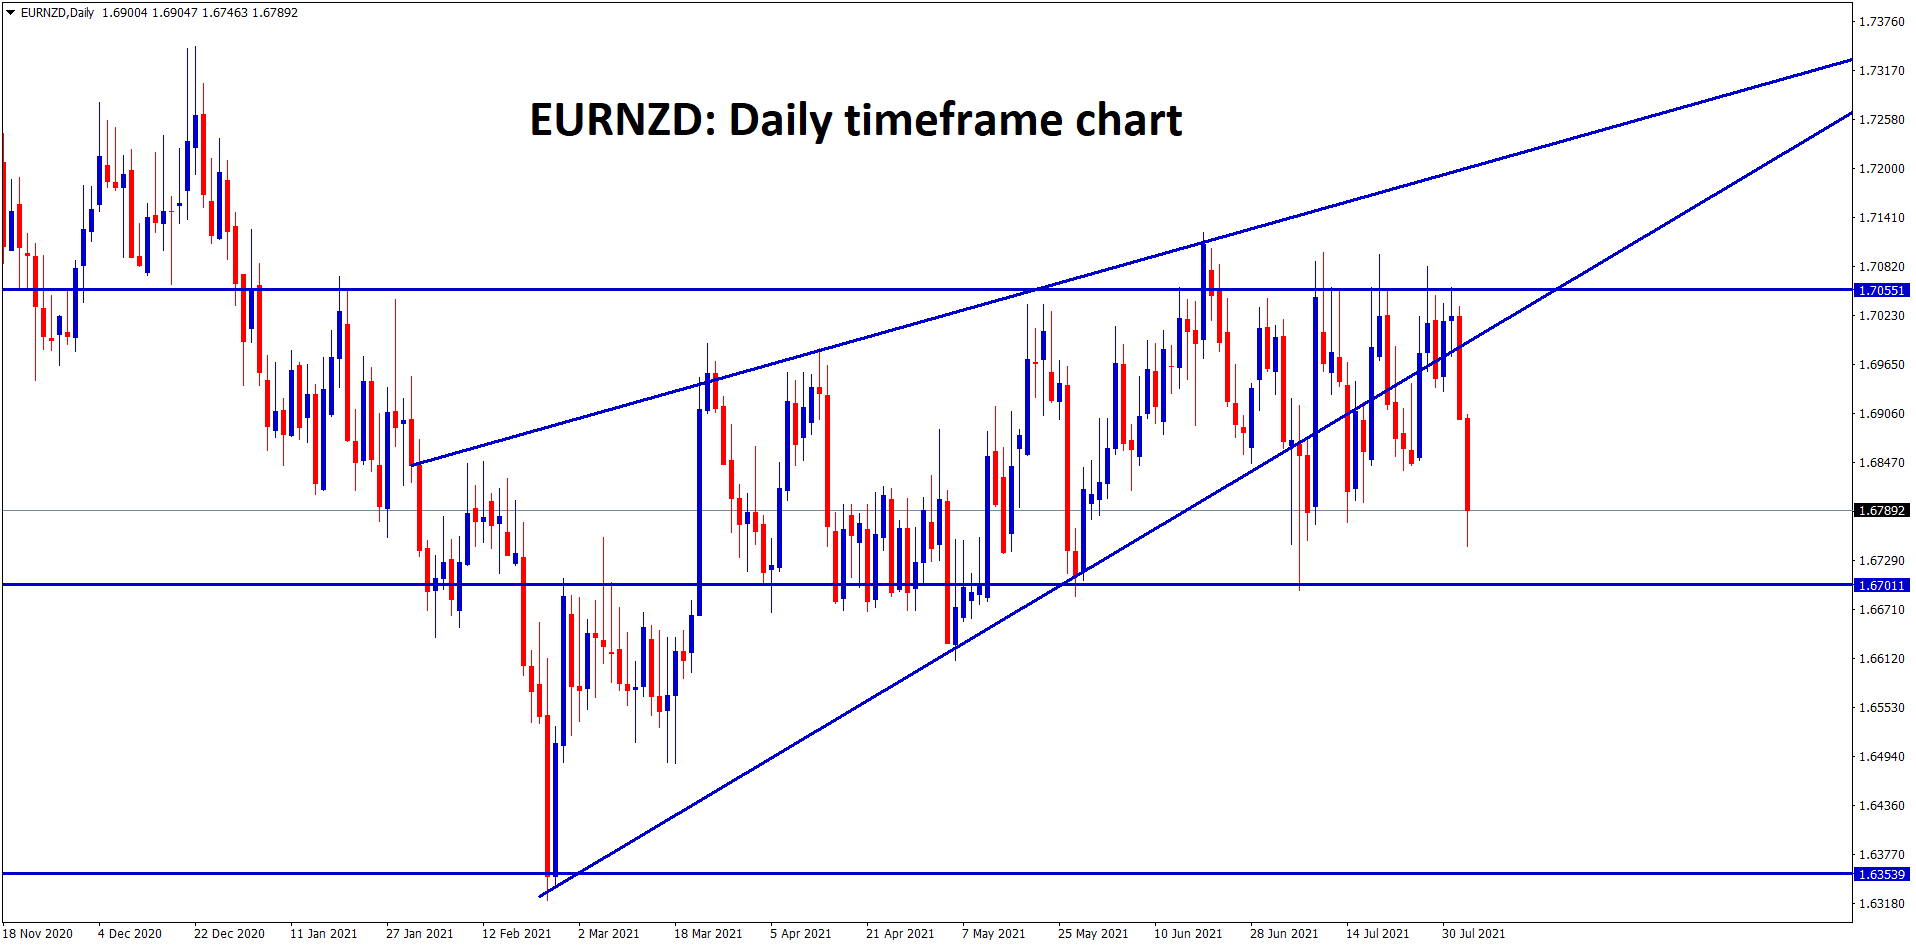 EURNZD is ranging between the resistance and support areas